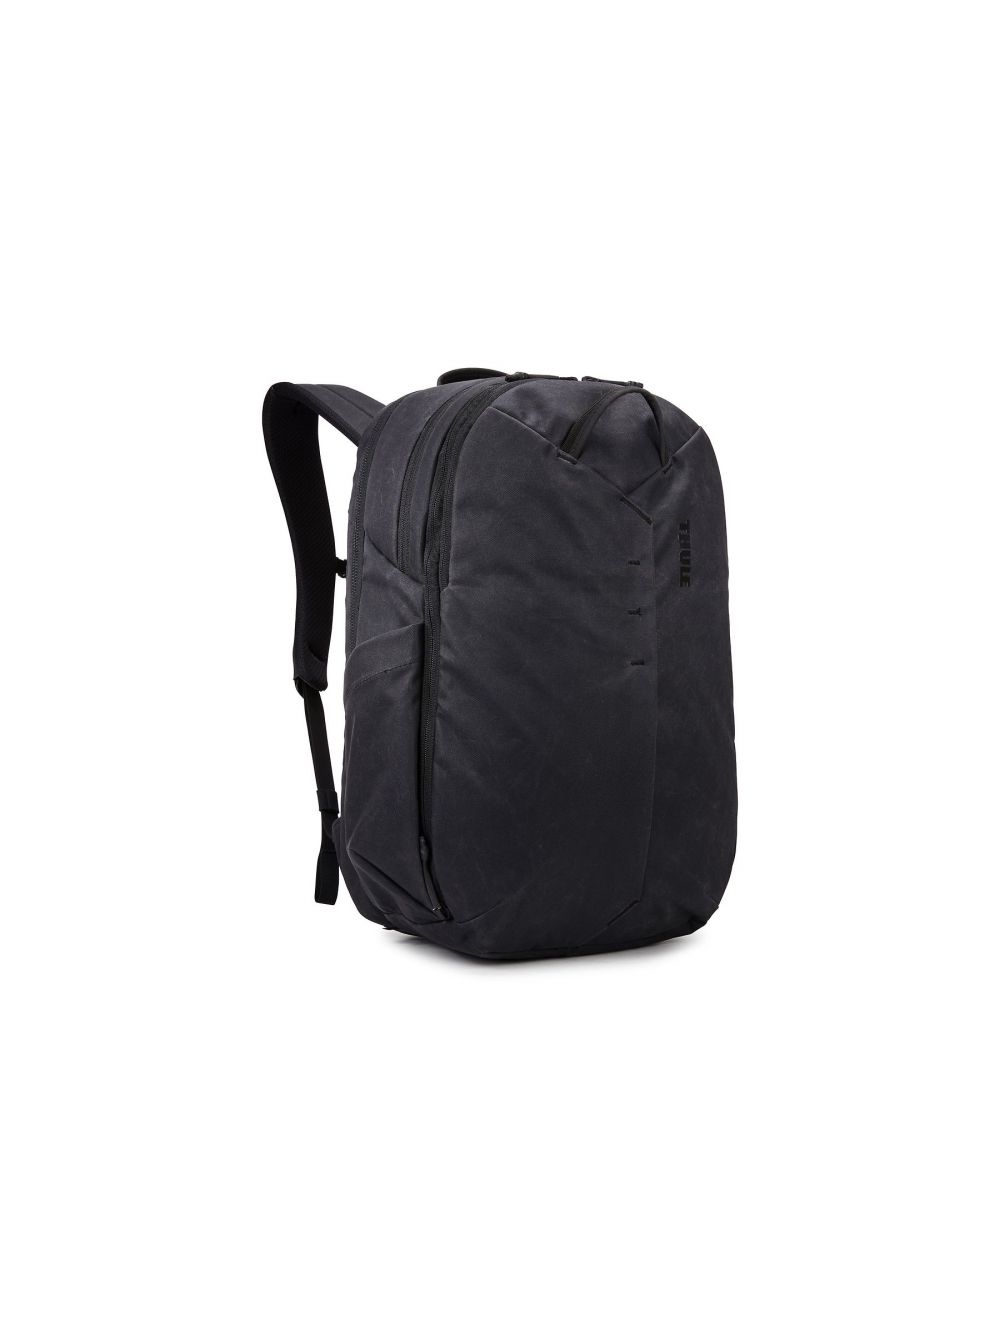 Thule Aion Travel Backpack 28L-32L